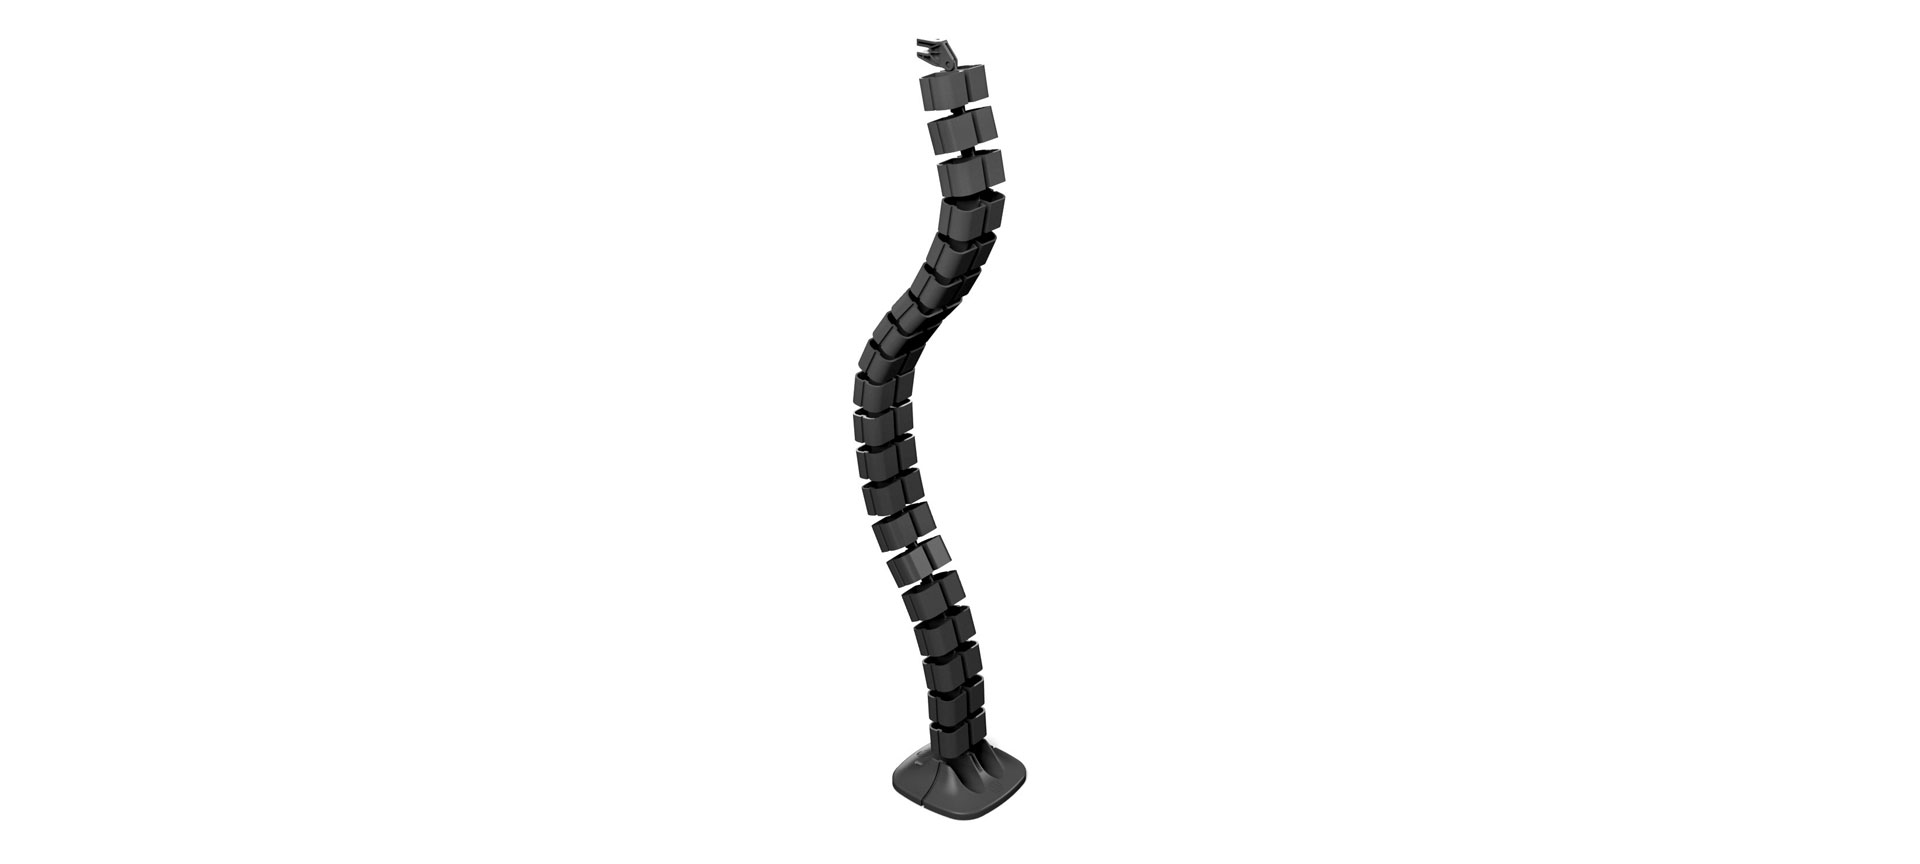 Metalicon Linx cable management spine